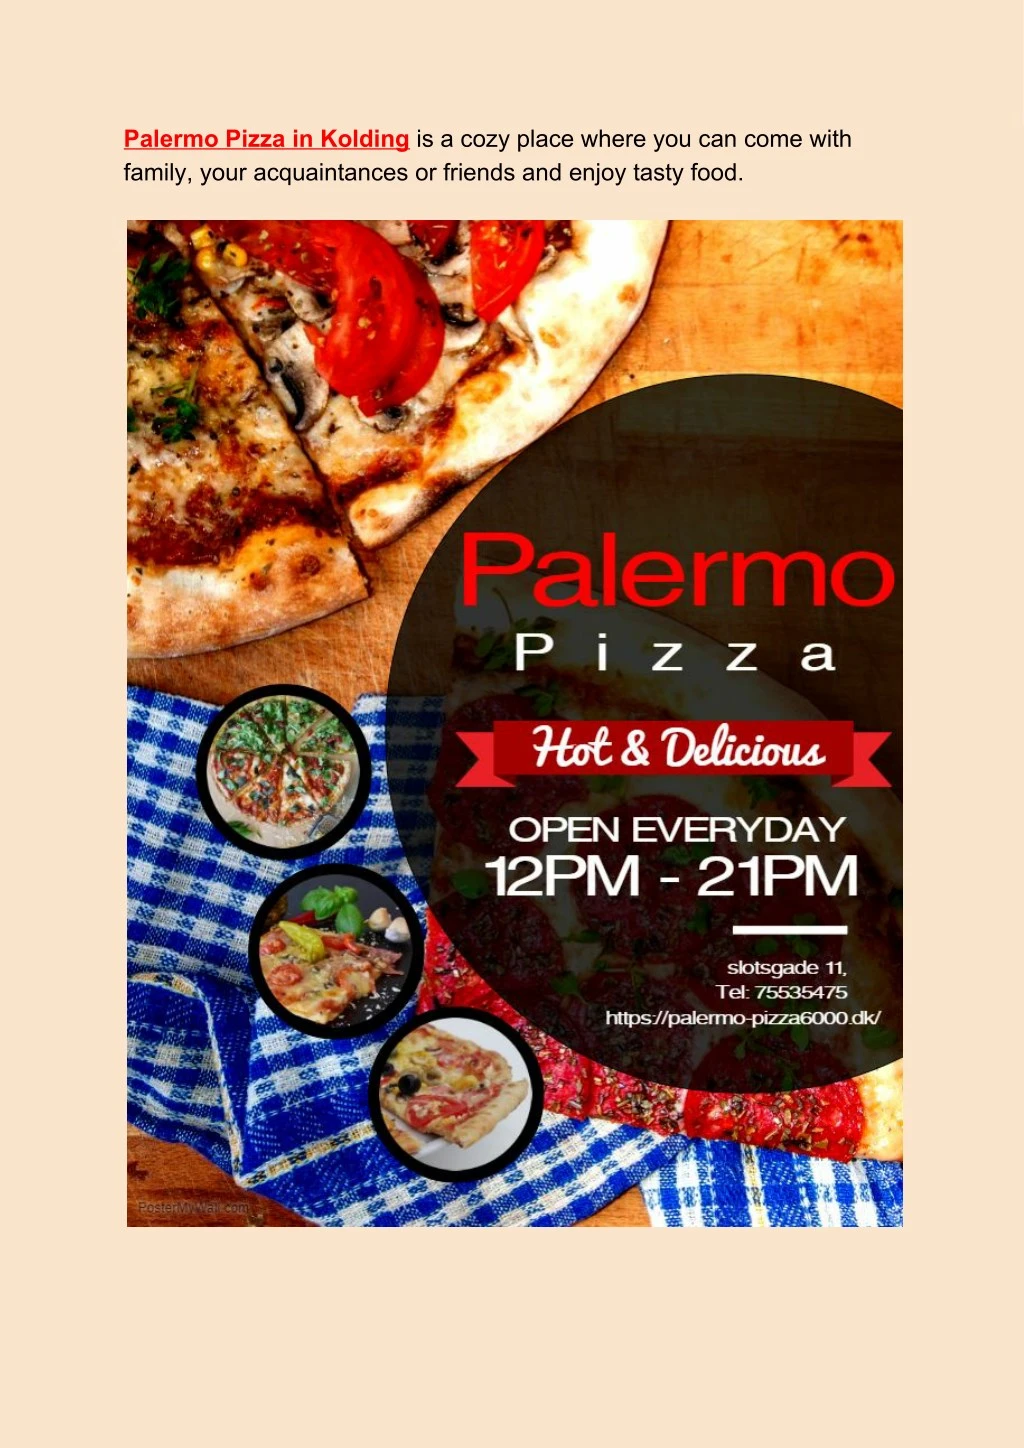 palermo pizza in kolding is a cozy place where